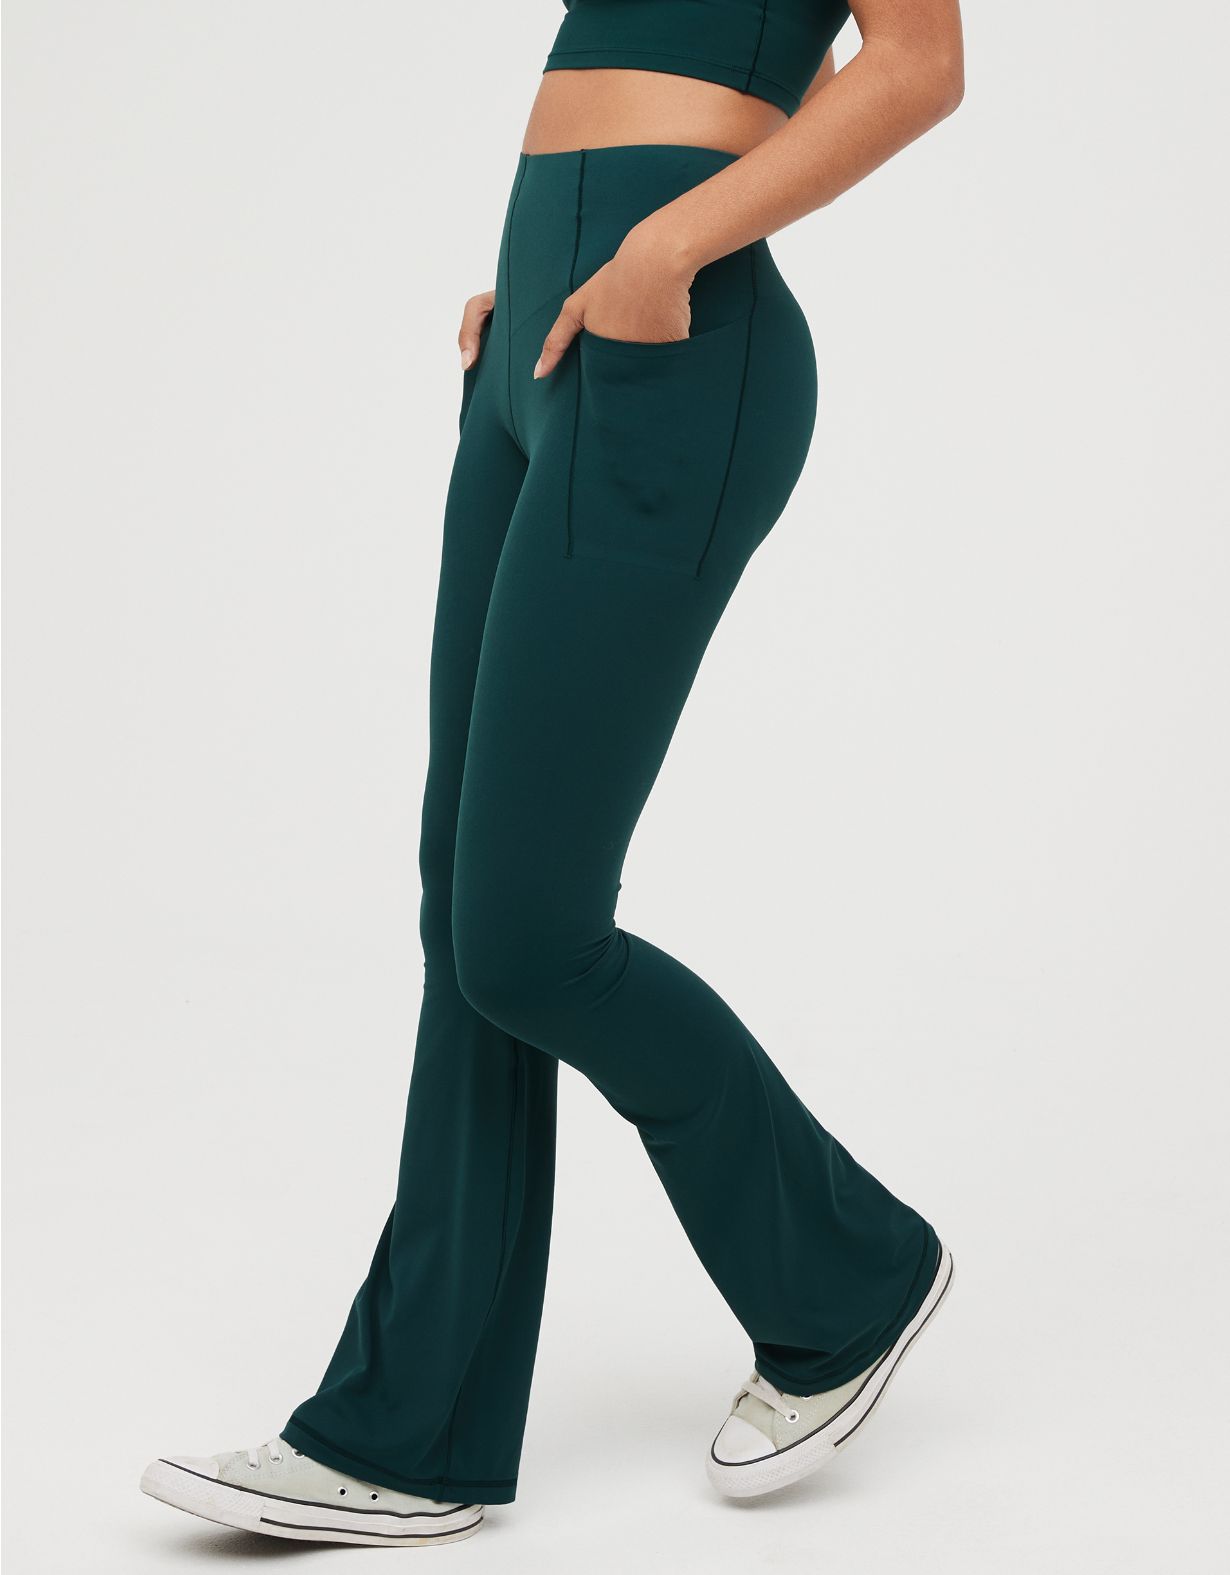 OFFLINE By Aerie Real Me Xtra Hold Up! Bootcut Legging con Bolsillo